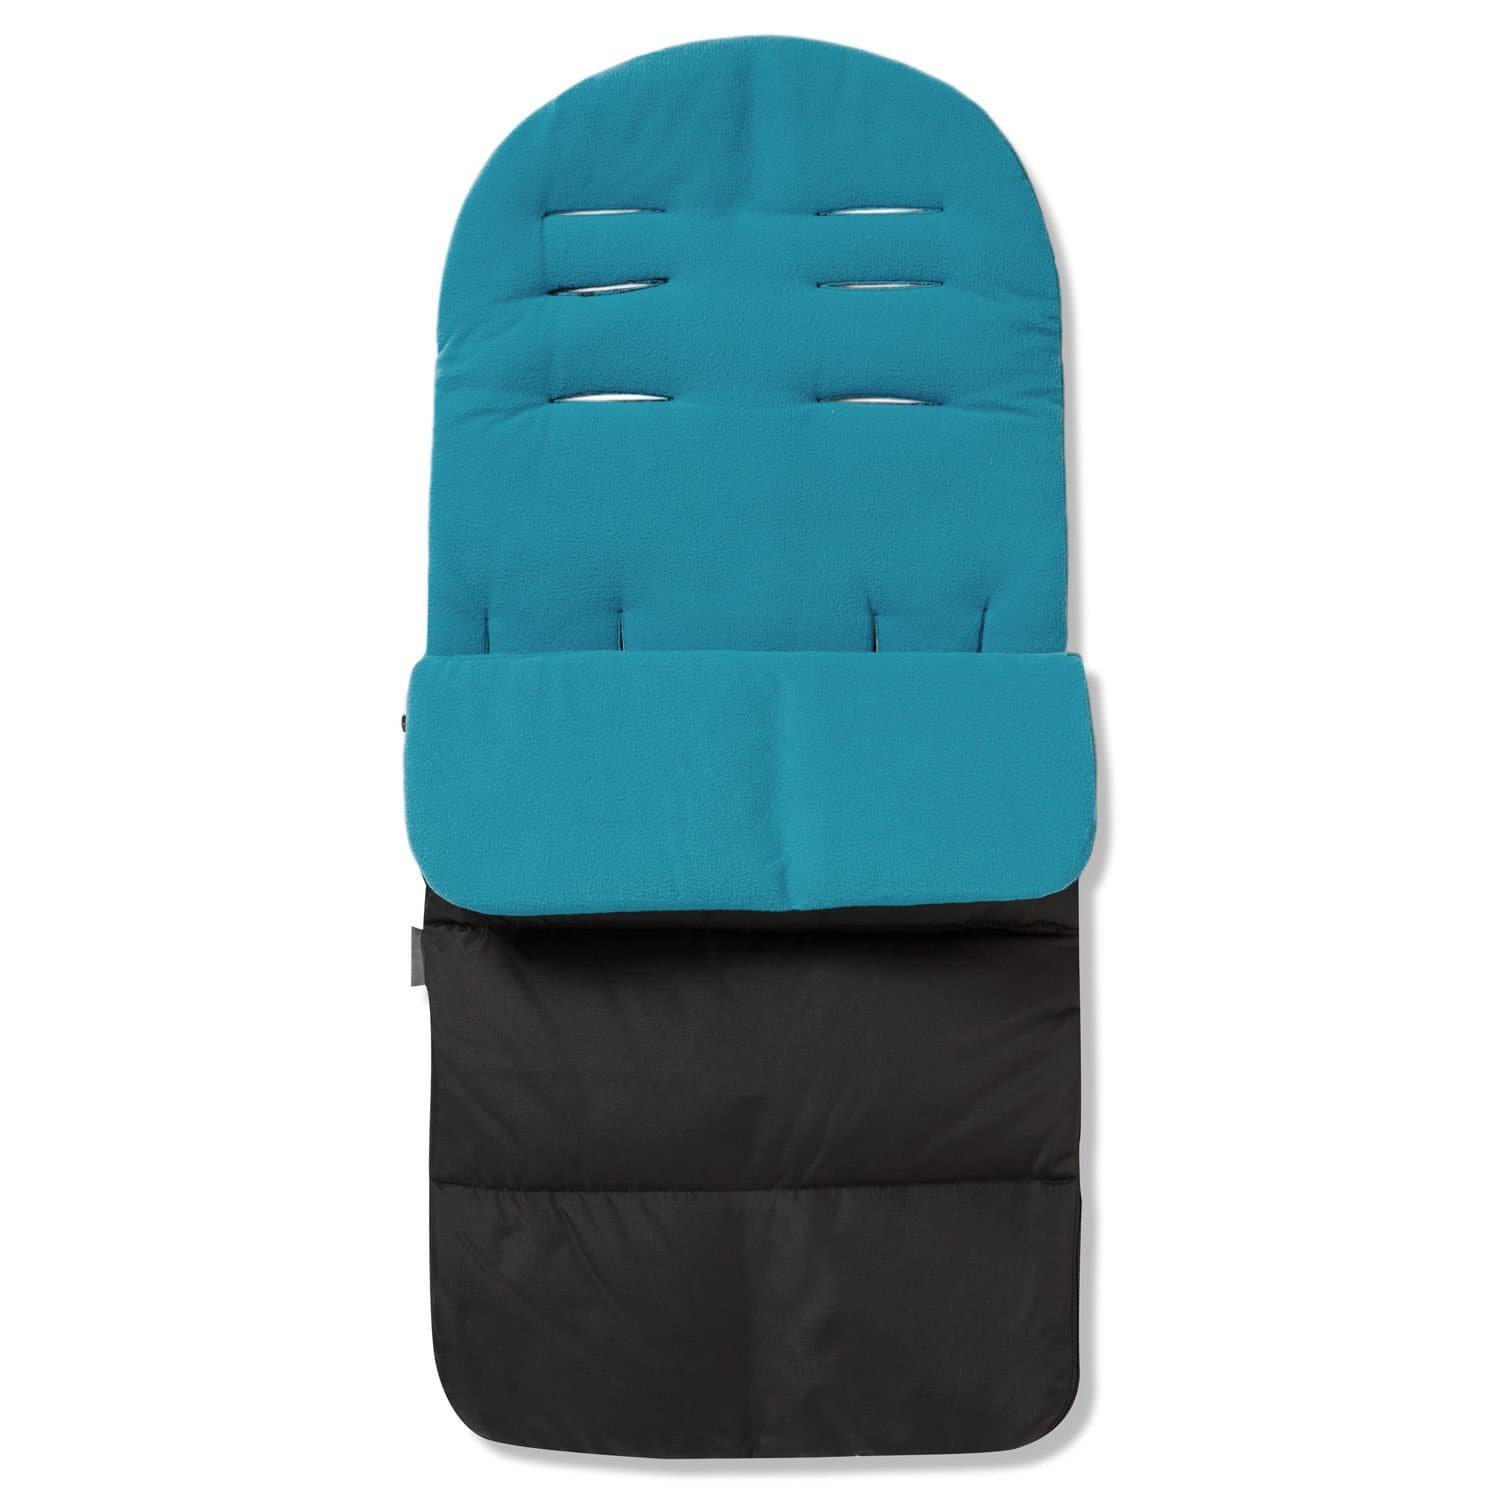 Premium Footmuff / Cosy Toes Compatible with Graco - For Your Little One